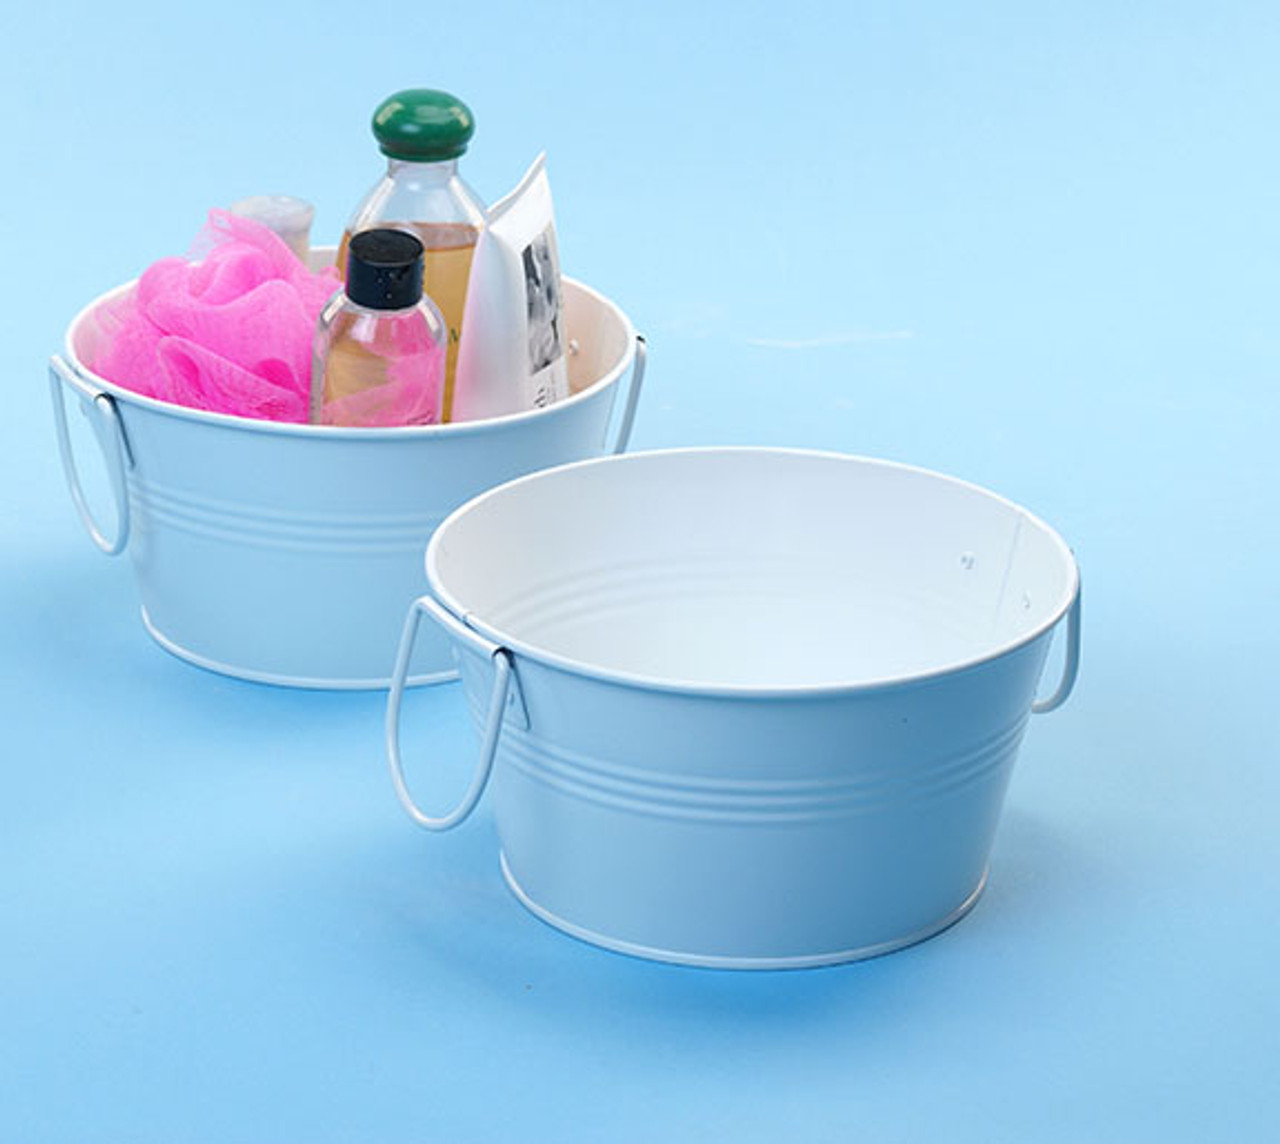 Large Tubs: Round containers